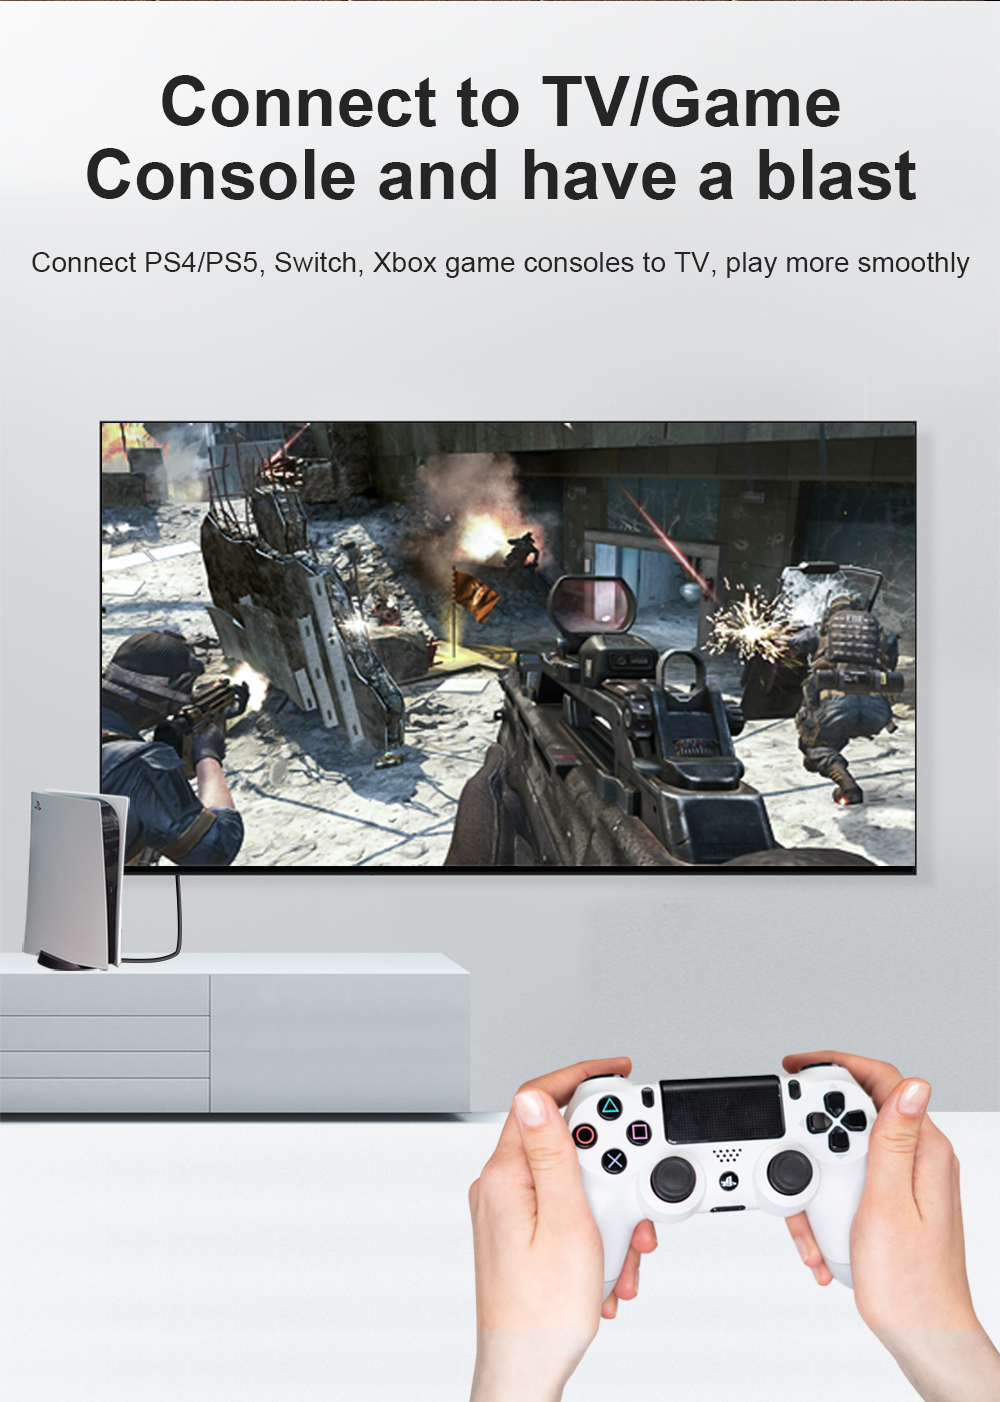 Connect to TV/Game Console and have a blast